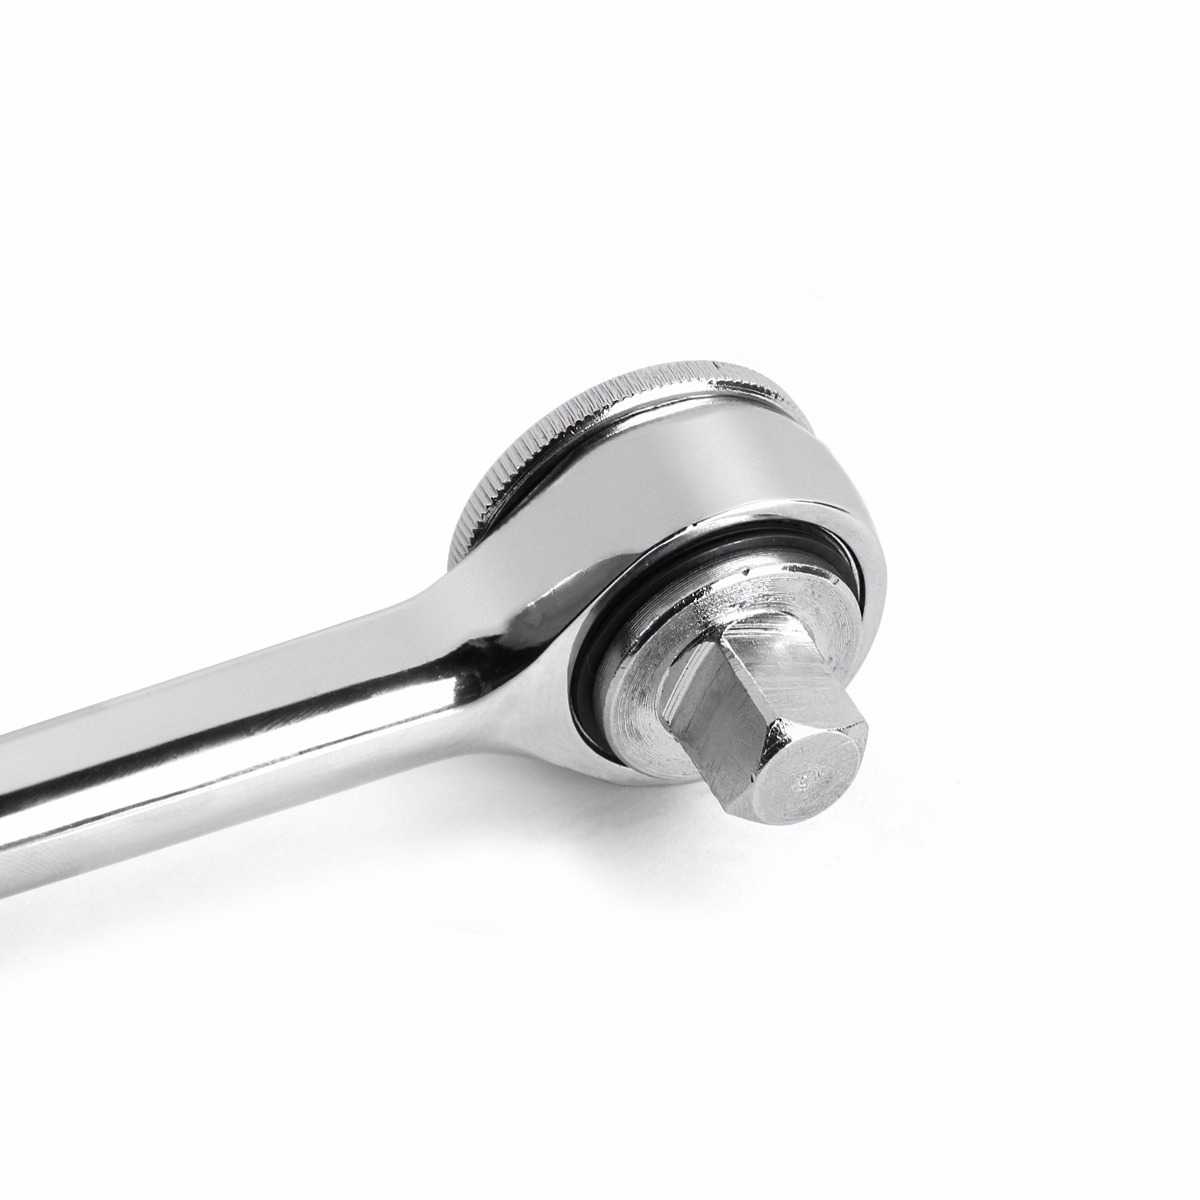 Stark 1/2' Drive Quick Release Ratchet with Polished Handle